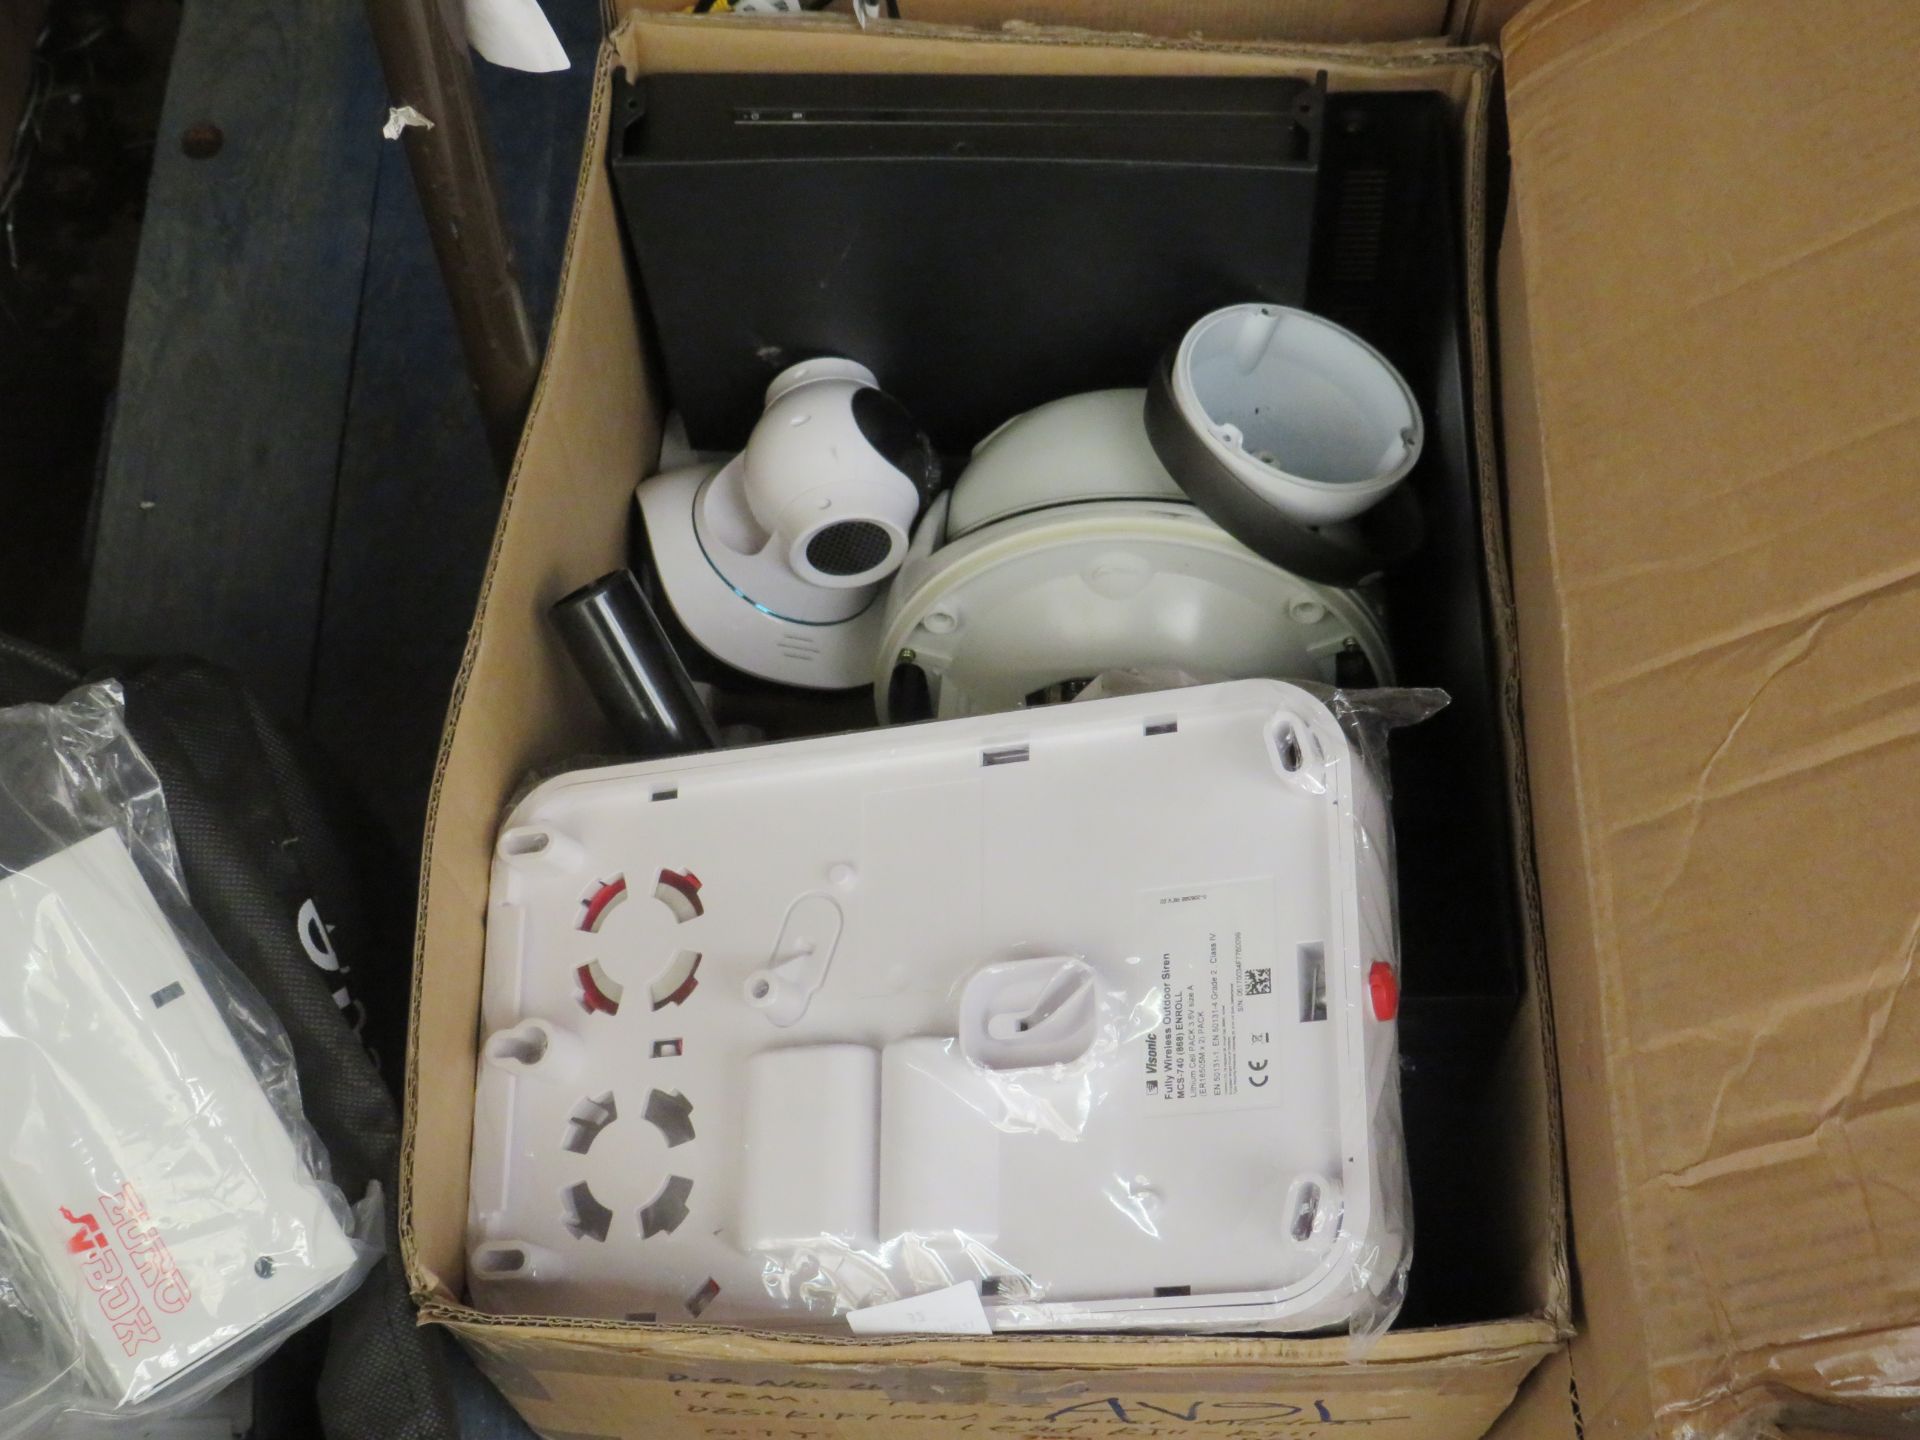 Box containing over 10x various CCTV parts, all loose and unchecked.